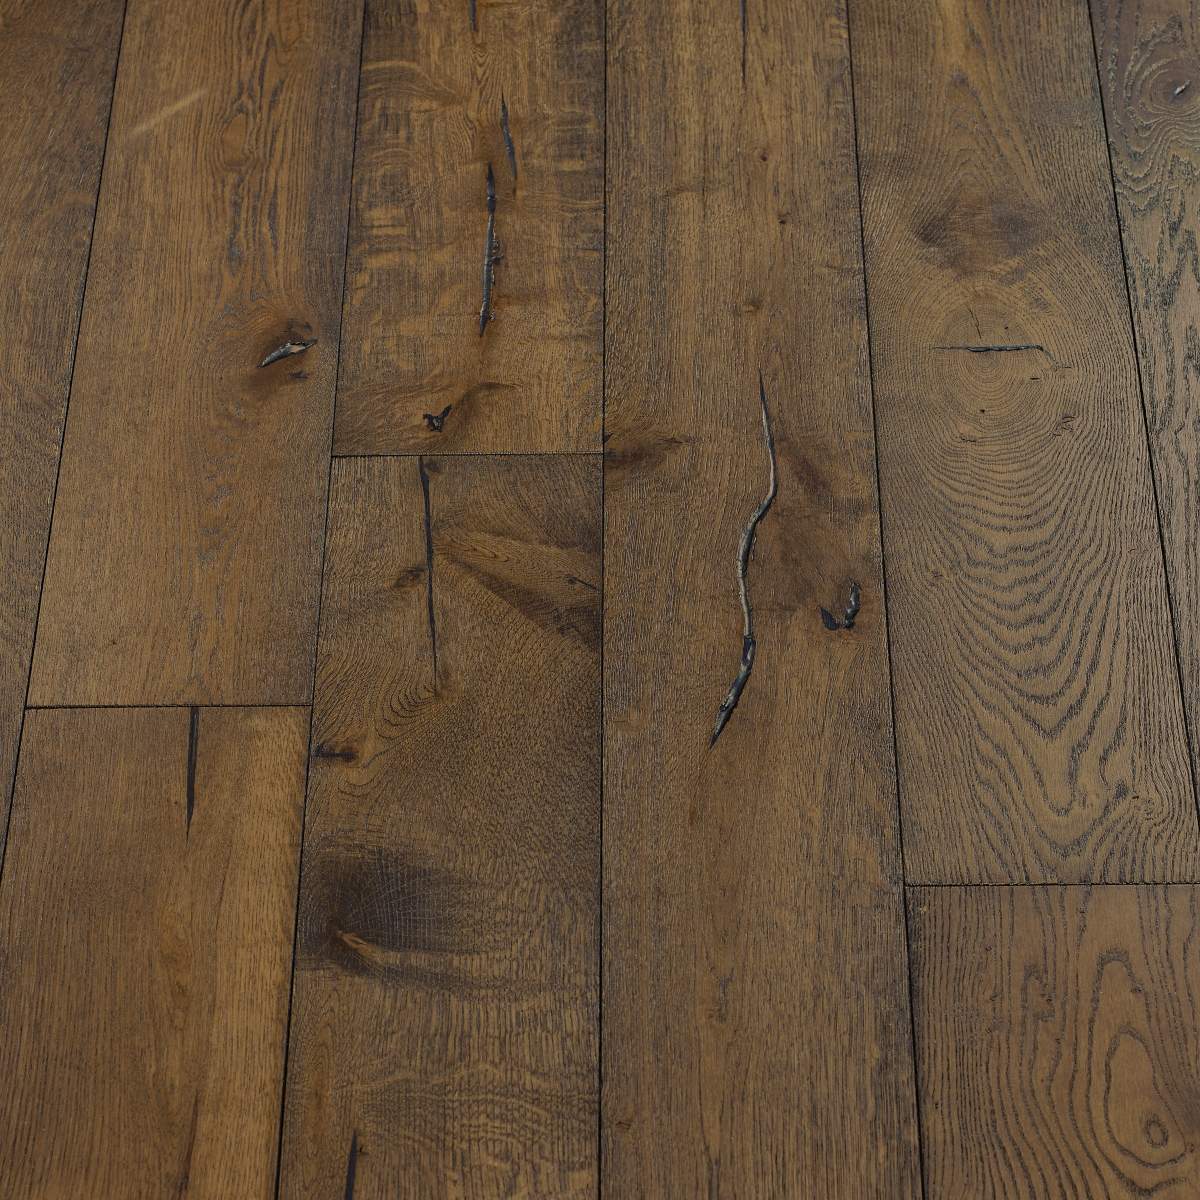 Distressed Mocha Flooring: An image showing distressed mocha flooring, characterized by its rich brown colour with distressed markings, adding depth and texture to the surface.